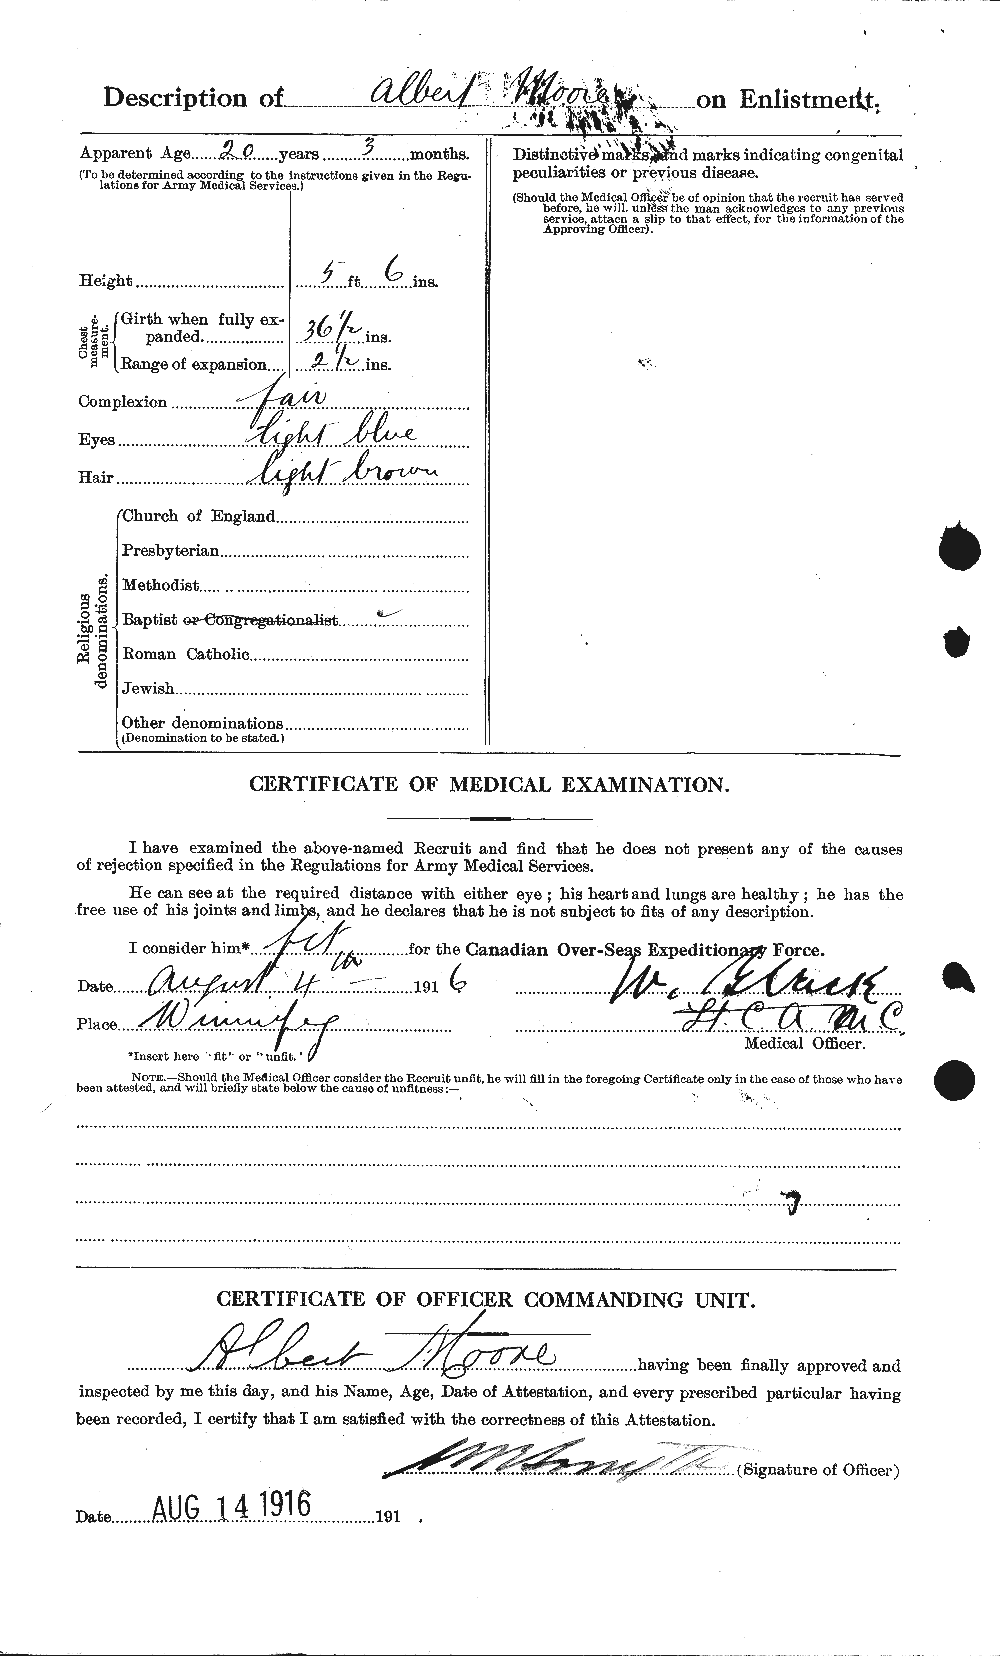 Personnel Records of the First World War - CEF 503215b